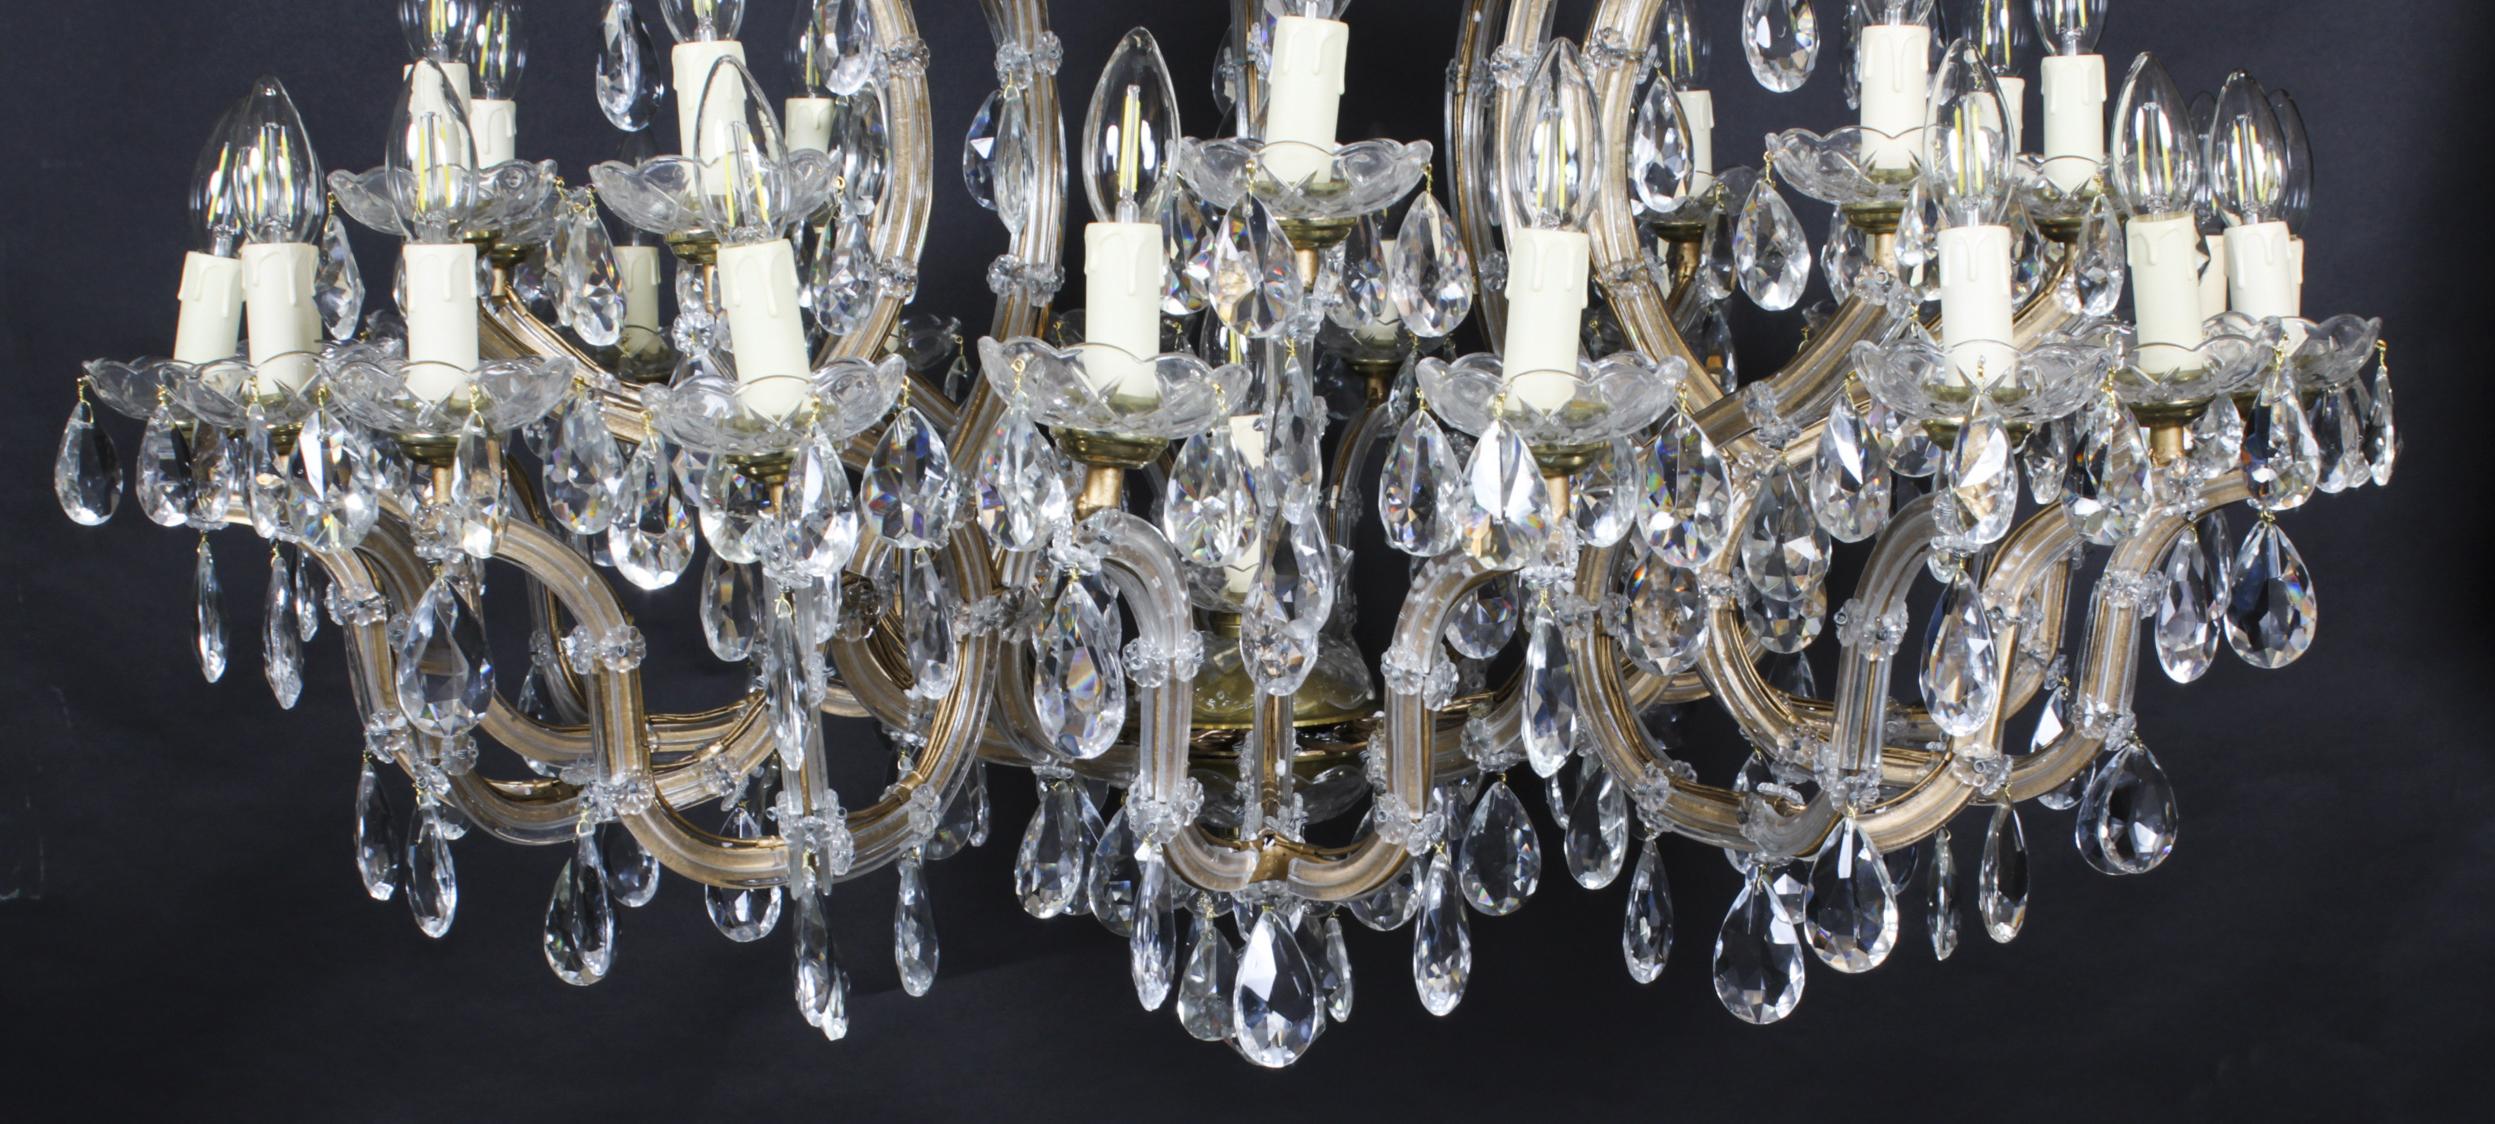 Early 20th Century Antique English 41 Light Ballroom Crystal Chandelier 1920s For Sale